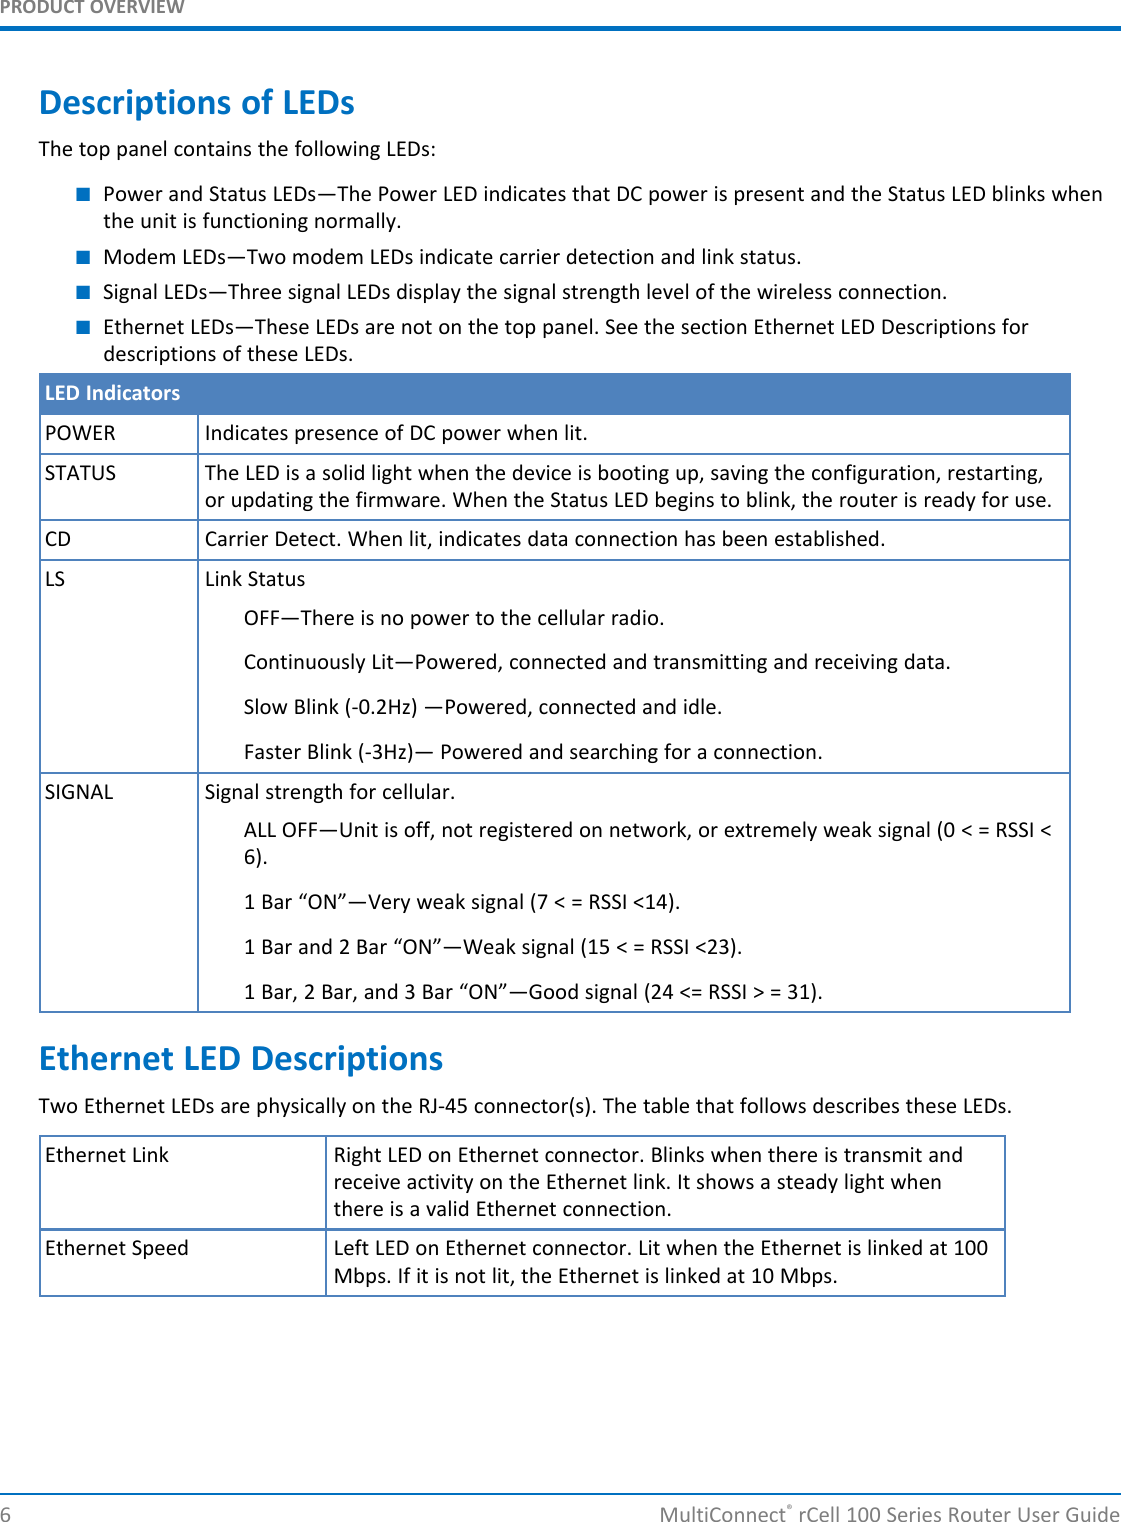 PRODUCT OVERVIEWDescriptions of LEDsThe top panel contains the following LEDs:■Power and Status LEDs—The Power LED indicates that DC power is present and the Status LED blinks whenthe unit is functioning normally.■Modem LEDs—Two modem LEDs indicate carrier detection and link status.■Signal LEDs—Three signal LEDs display the signal strength level of the wireless connection.■Ethernet LEDs—These LEDs are not on the top panel. See the section Ethernet LED Descriptions fordescriptions of these LEDs.LED IndicatorsPOWER Indicates presence of DC power when lit.STATUS The LED is a solid light when the device is booting up, saving the configuration, restarting,or updating the firmware. When the Status LED begins to blink, the router is ready for use.CD Carrier Detect. When lit, indicates data connection has been established.LS Link StatusOFF—There is no power to the cellular radio.Continuously Lit—Powered, connected and transmitting and receiving data.Slow Blink (-0.2Hz) —Powered, connected and idle.Faster Blink (-3Hz)— Powered and searching for a connection.SIGNAL Signal strength for cellular.ALL OFF—Unit is off, not registered on network, or extremely weak signal (0 &lt; = RSSI &lt;6).1 Bar “ON”—Very weak signal (7 &lt; = RSSI &lt;14).1 Bar and 2 Bar “ON”—Weak signal (15 &lt; = RSSI &lt;23).1 Bar, 2 Bar, and 3 Bar “ON”—Good signal (24 &lt;= RSSI &gt; = 31).Ethernet LED DescriptionsTwo Ethernet LEDs are physically on the RJ-45 connector(s). The table that follows describes these LEDs.Ethernet Link Right LED on Ethernet connector. Blinks when there is transmit andreceive activity on the Ethernet link. It shows a steady light whenthere is a valid Ethernet connection.Ethernet Speed Left LED on Ethernet connector. Lit when the Ethernet is linked at 100Mbps. If it is not lit, the Ethernet is linked at 10 Mbps.6 MultiConnect®rCell 100 Series Router User Guide